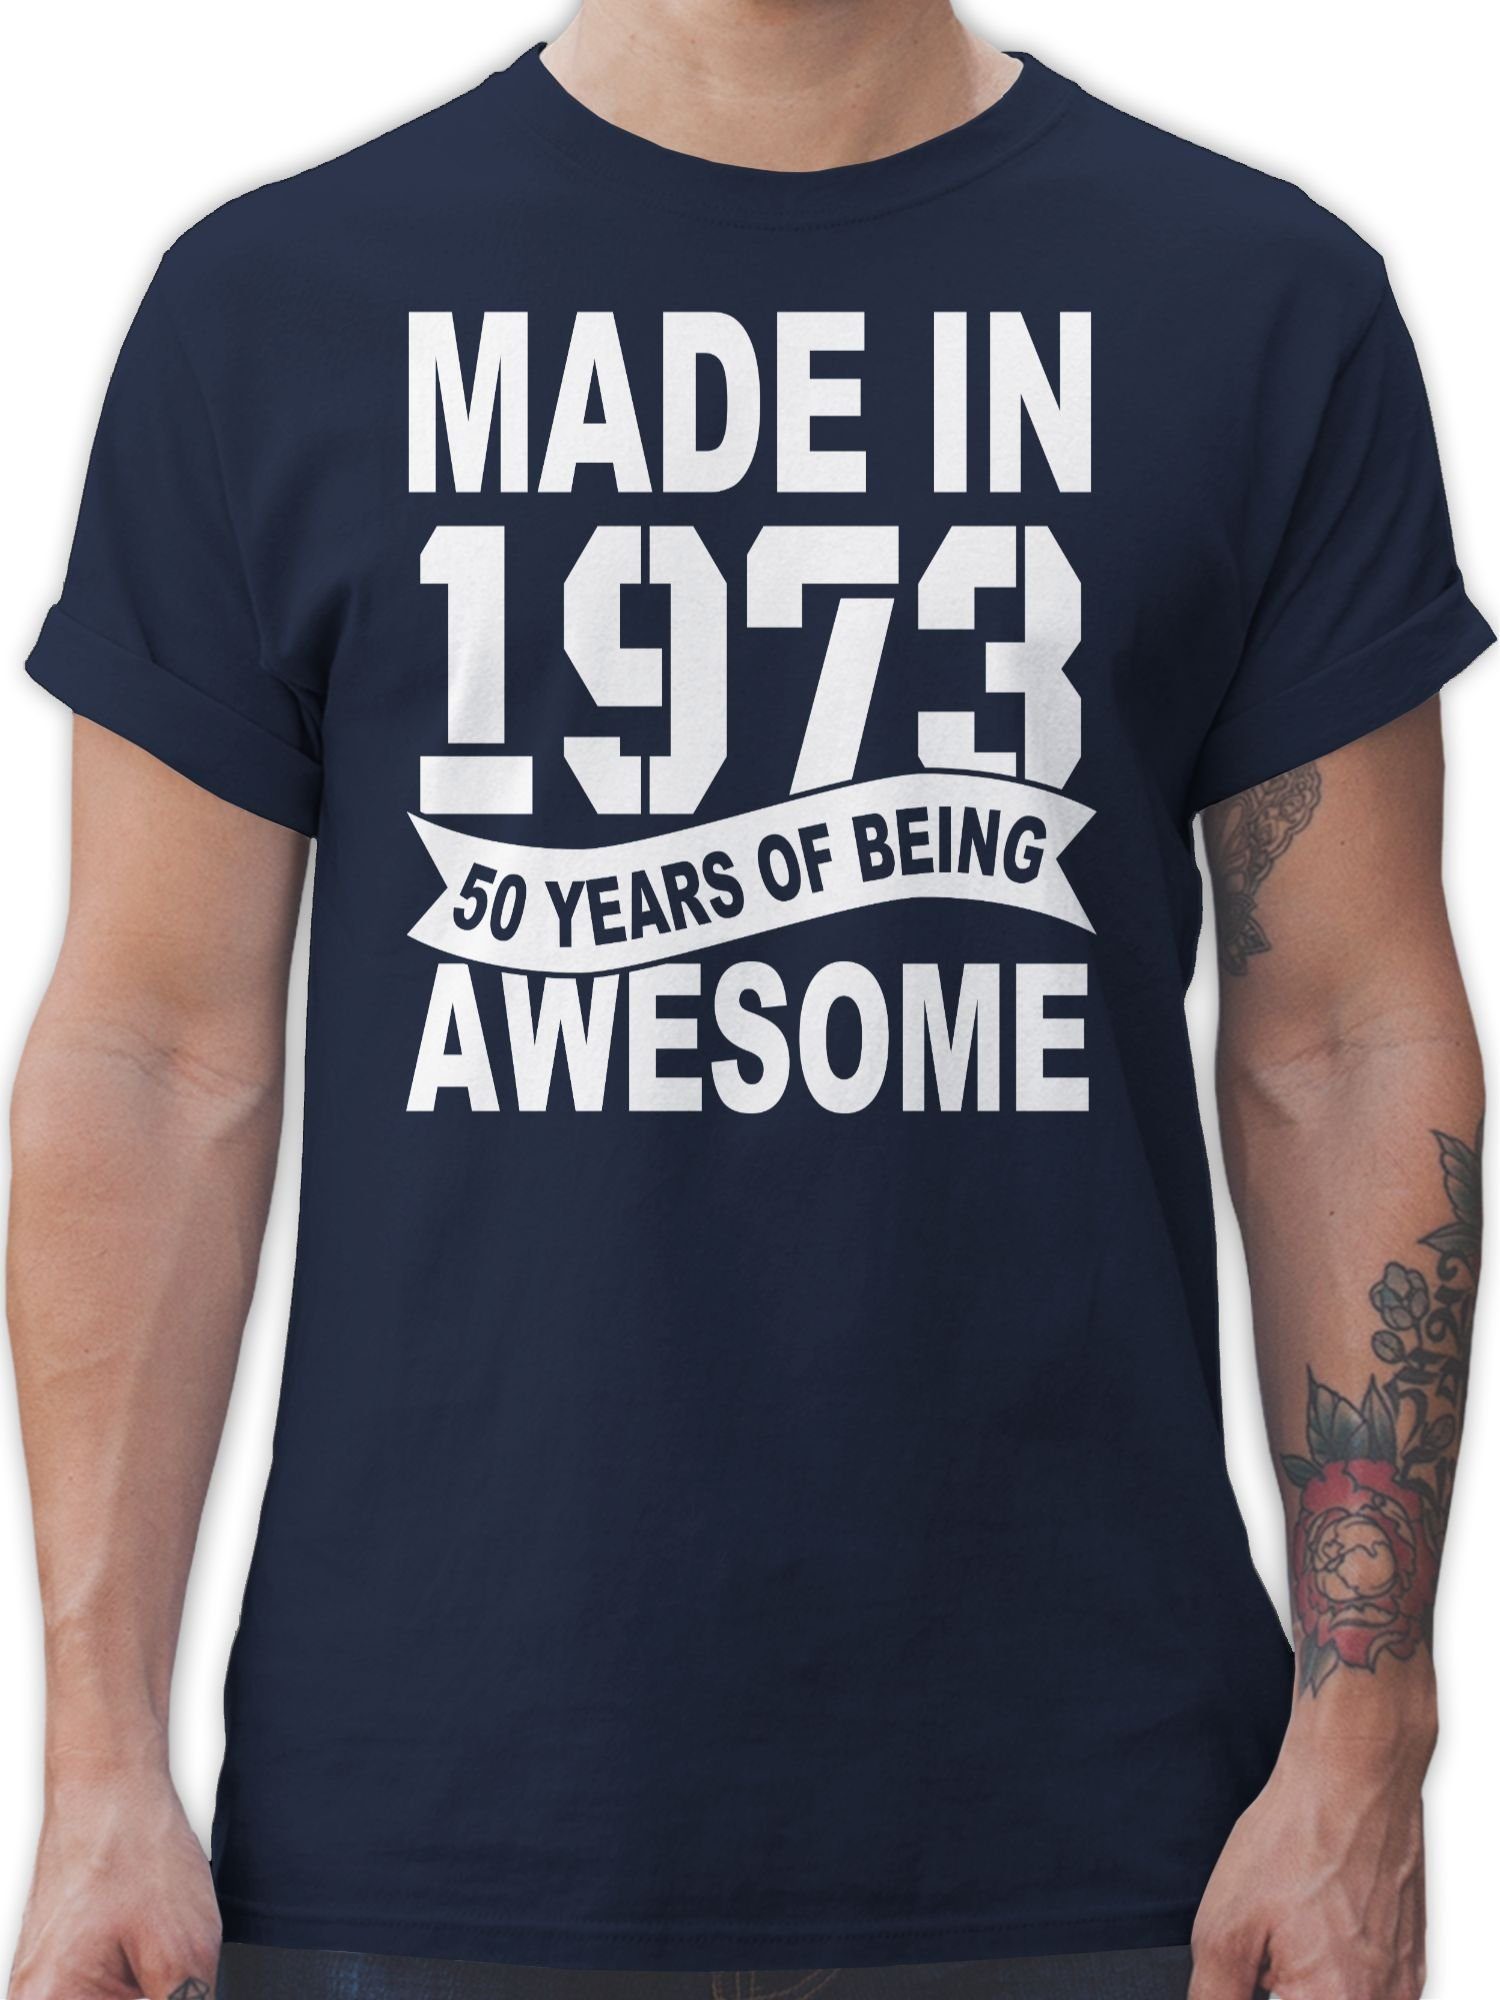 Made in Shirtracer 1 Geburtstag 1973 Fifty of weiß being 50. Navy T-Shirt awesome years Blau